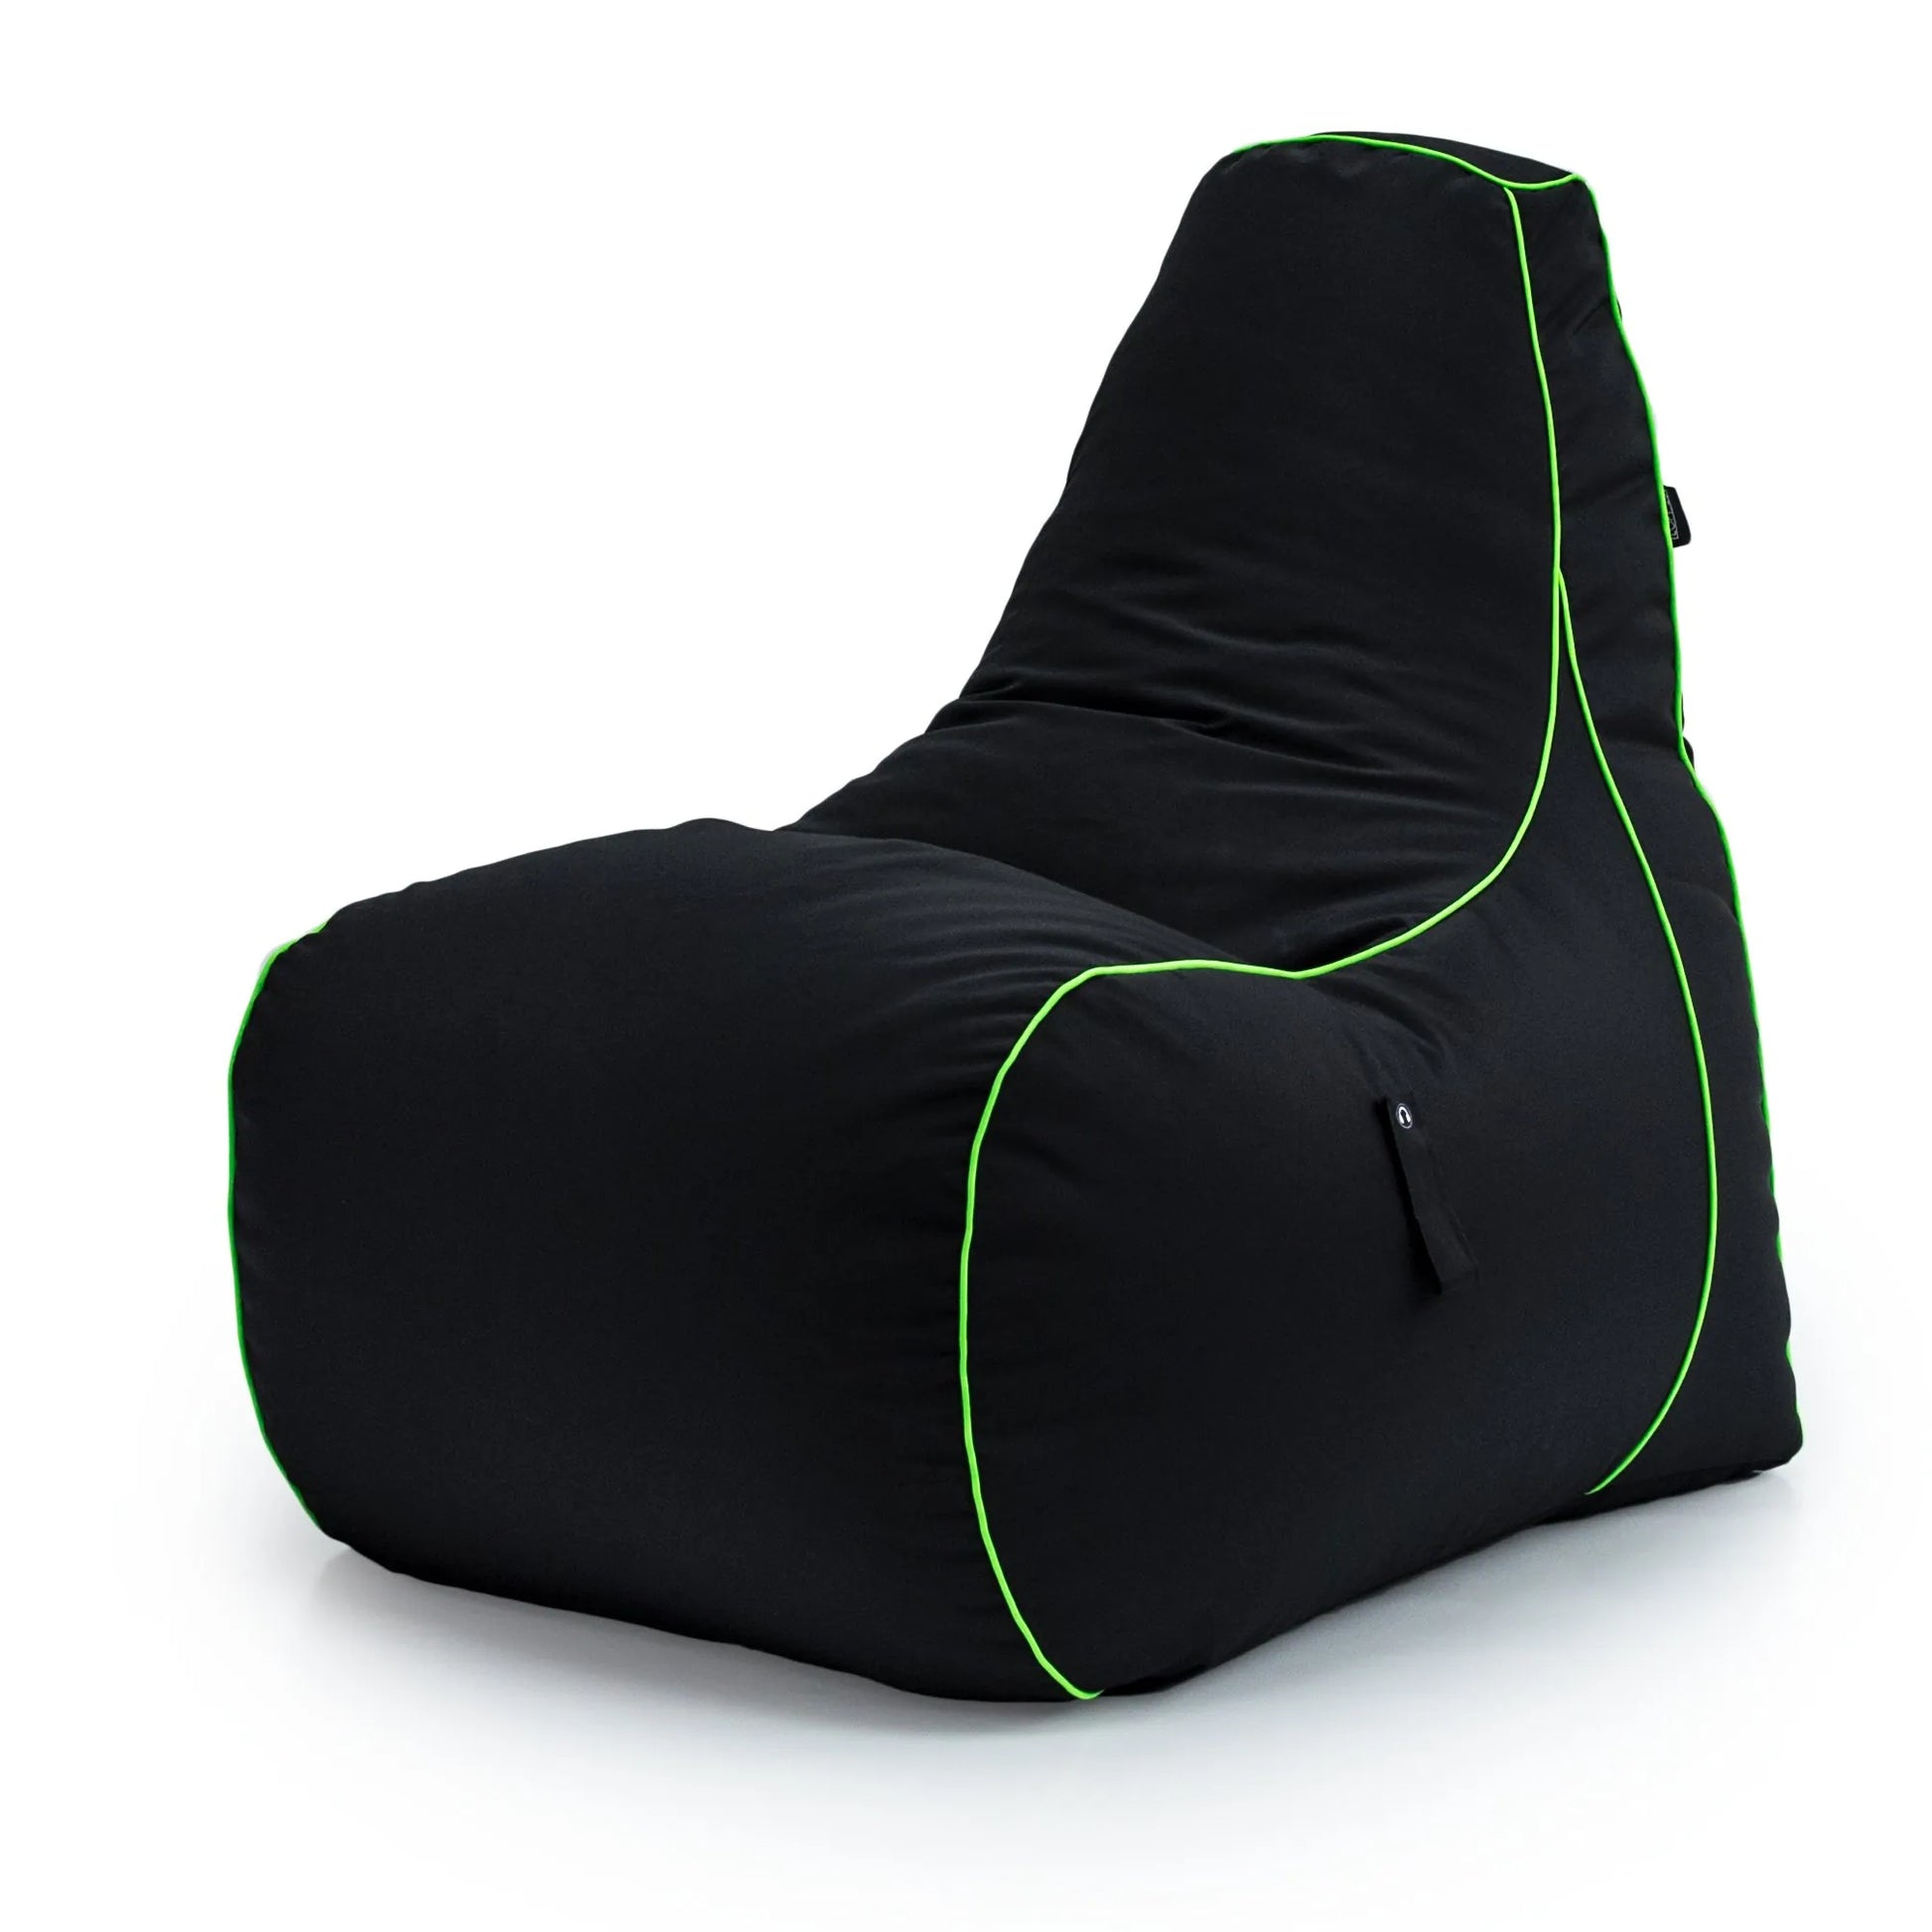 Black bean bag chair cover with neon green trim on a white background.